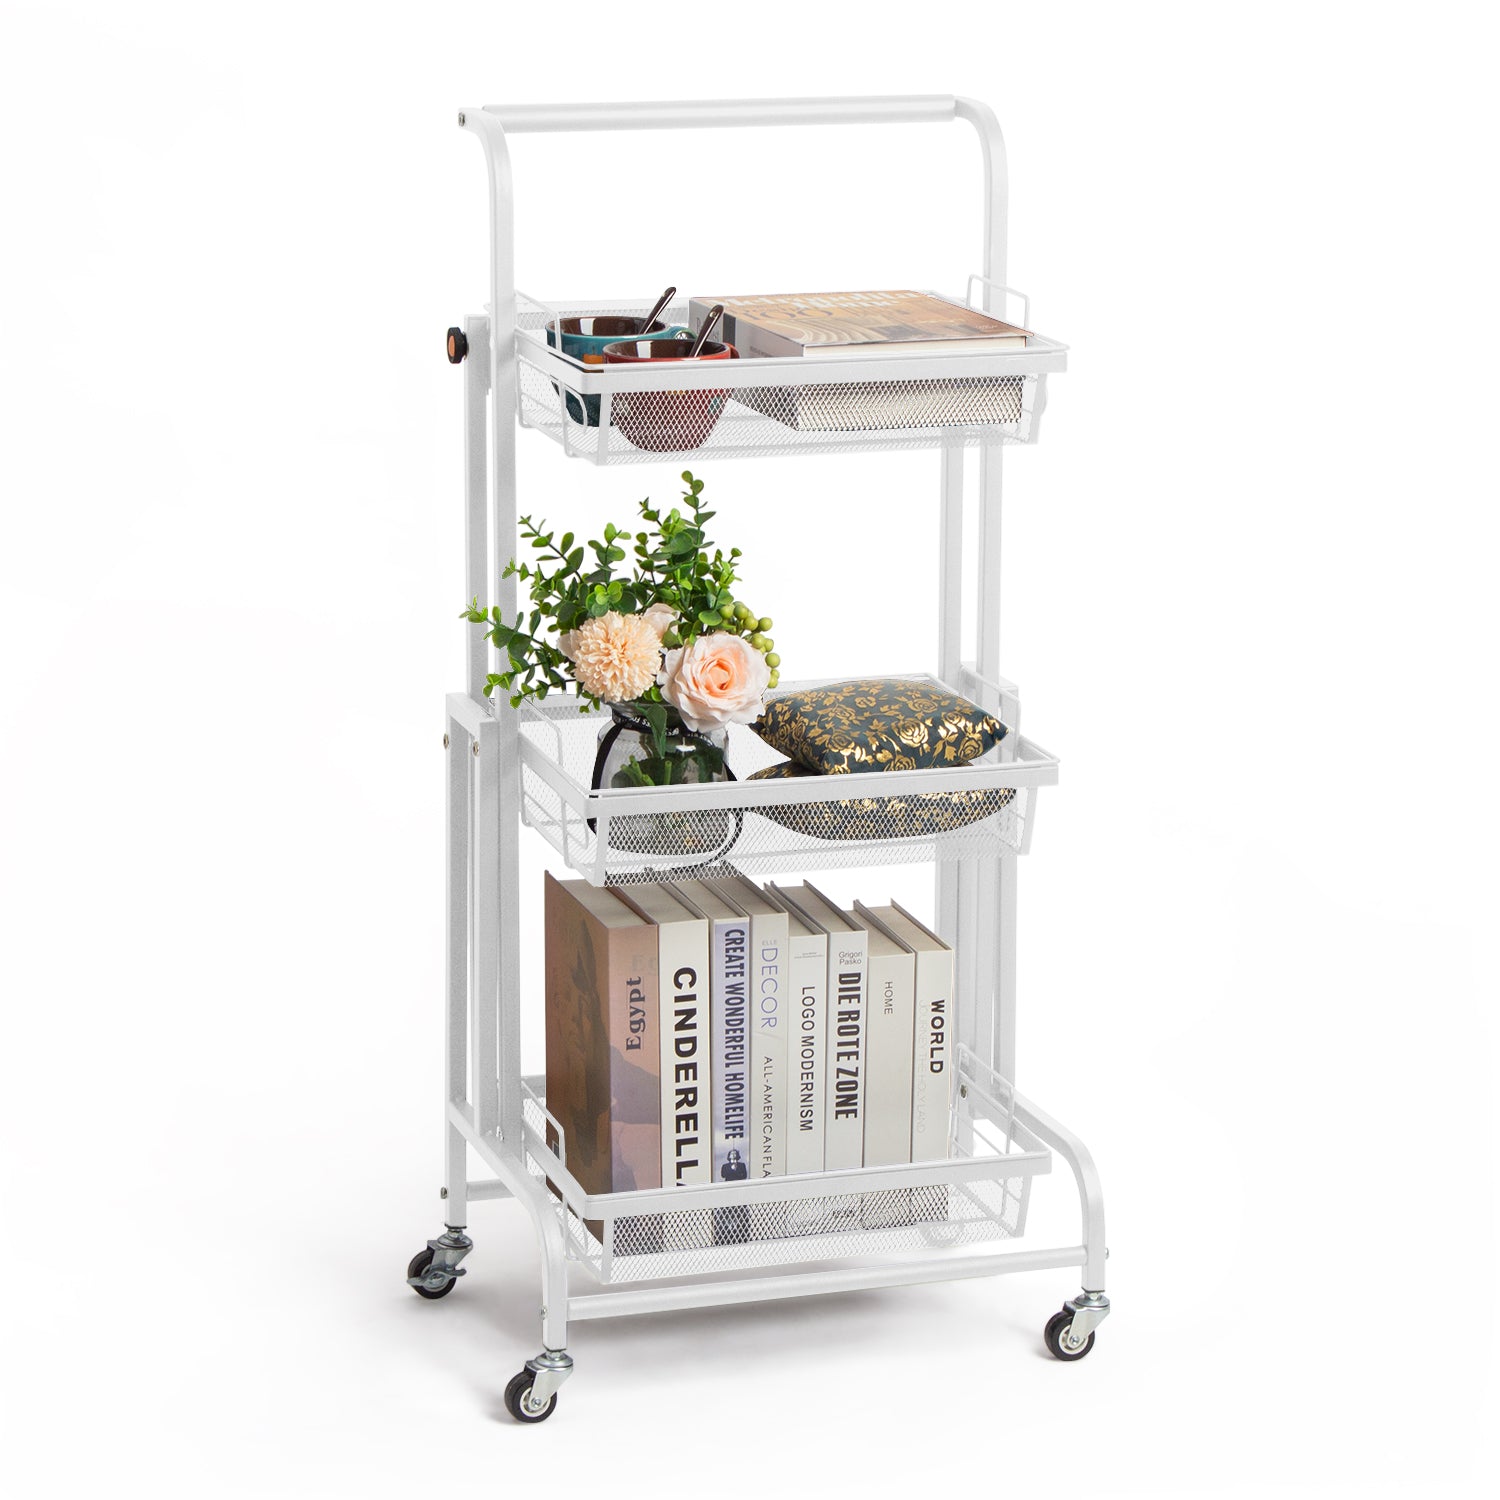 Todeco-Trolley-on-Wheels-Kitchen-Trolley-with-3-Levels-90-180-Adjustable-Angle-Kitchen-Trolley-with-Removable-Tray-for-Kitchen-Office-Bathroom-Cloakroom-44-5-30-5-94-5-cm-White